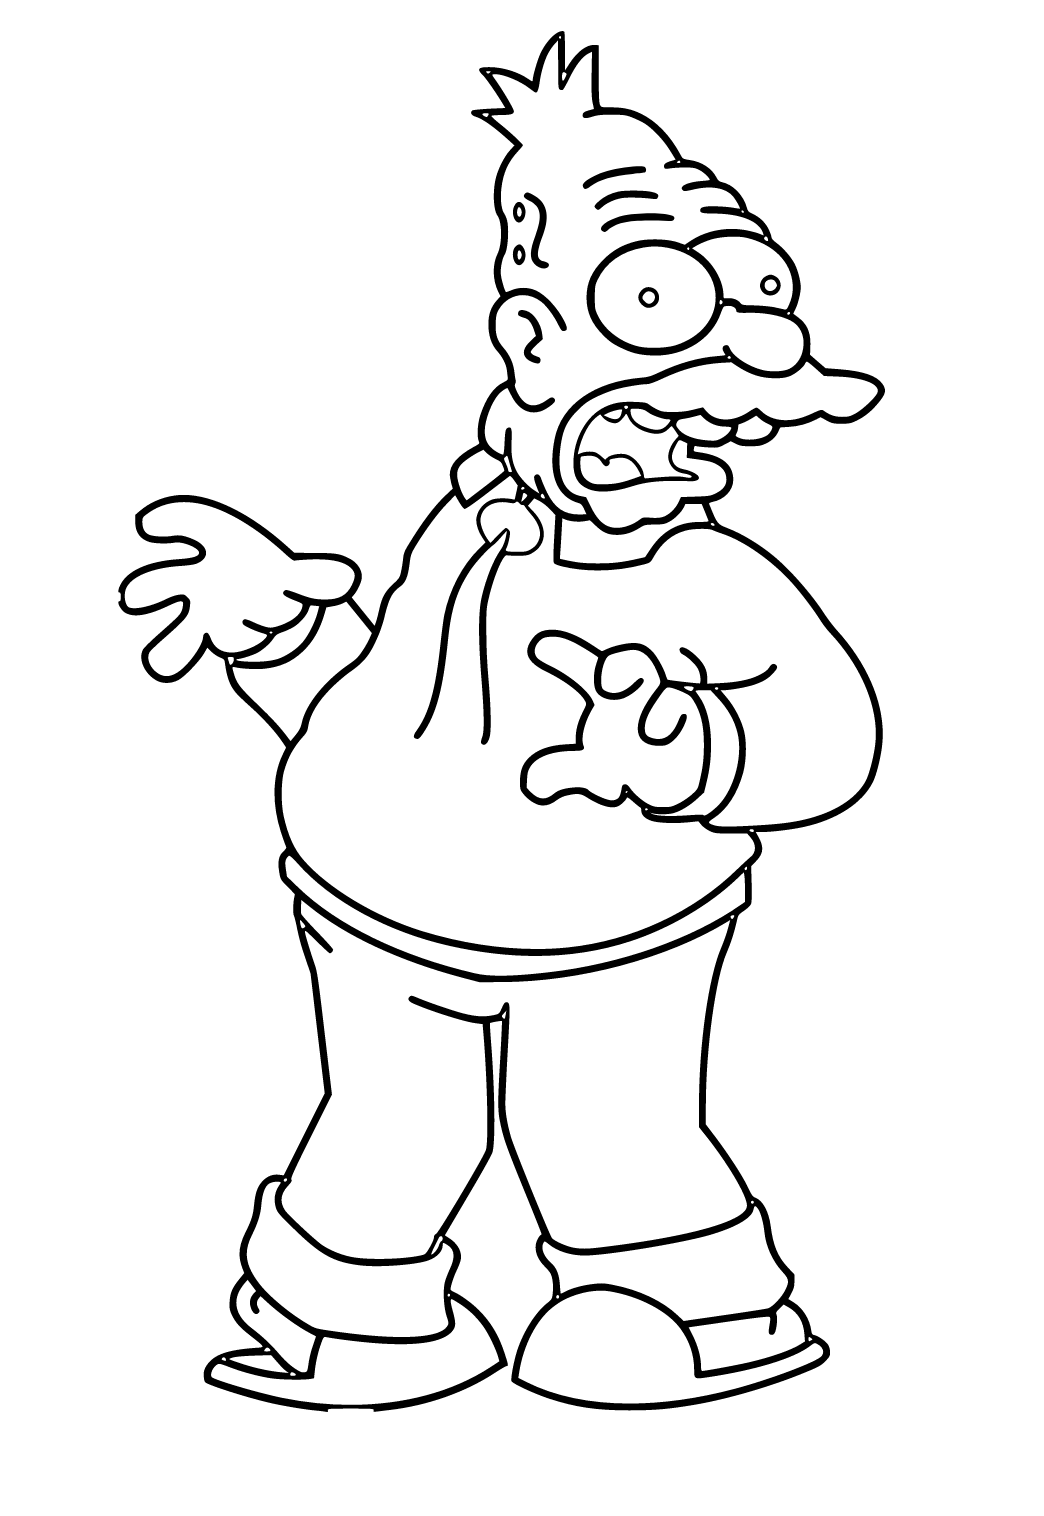 Free Printable Simpsons Grandfather Coloring Page, Sheet and Picture